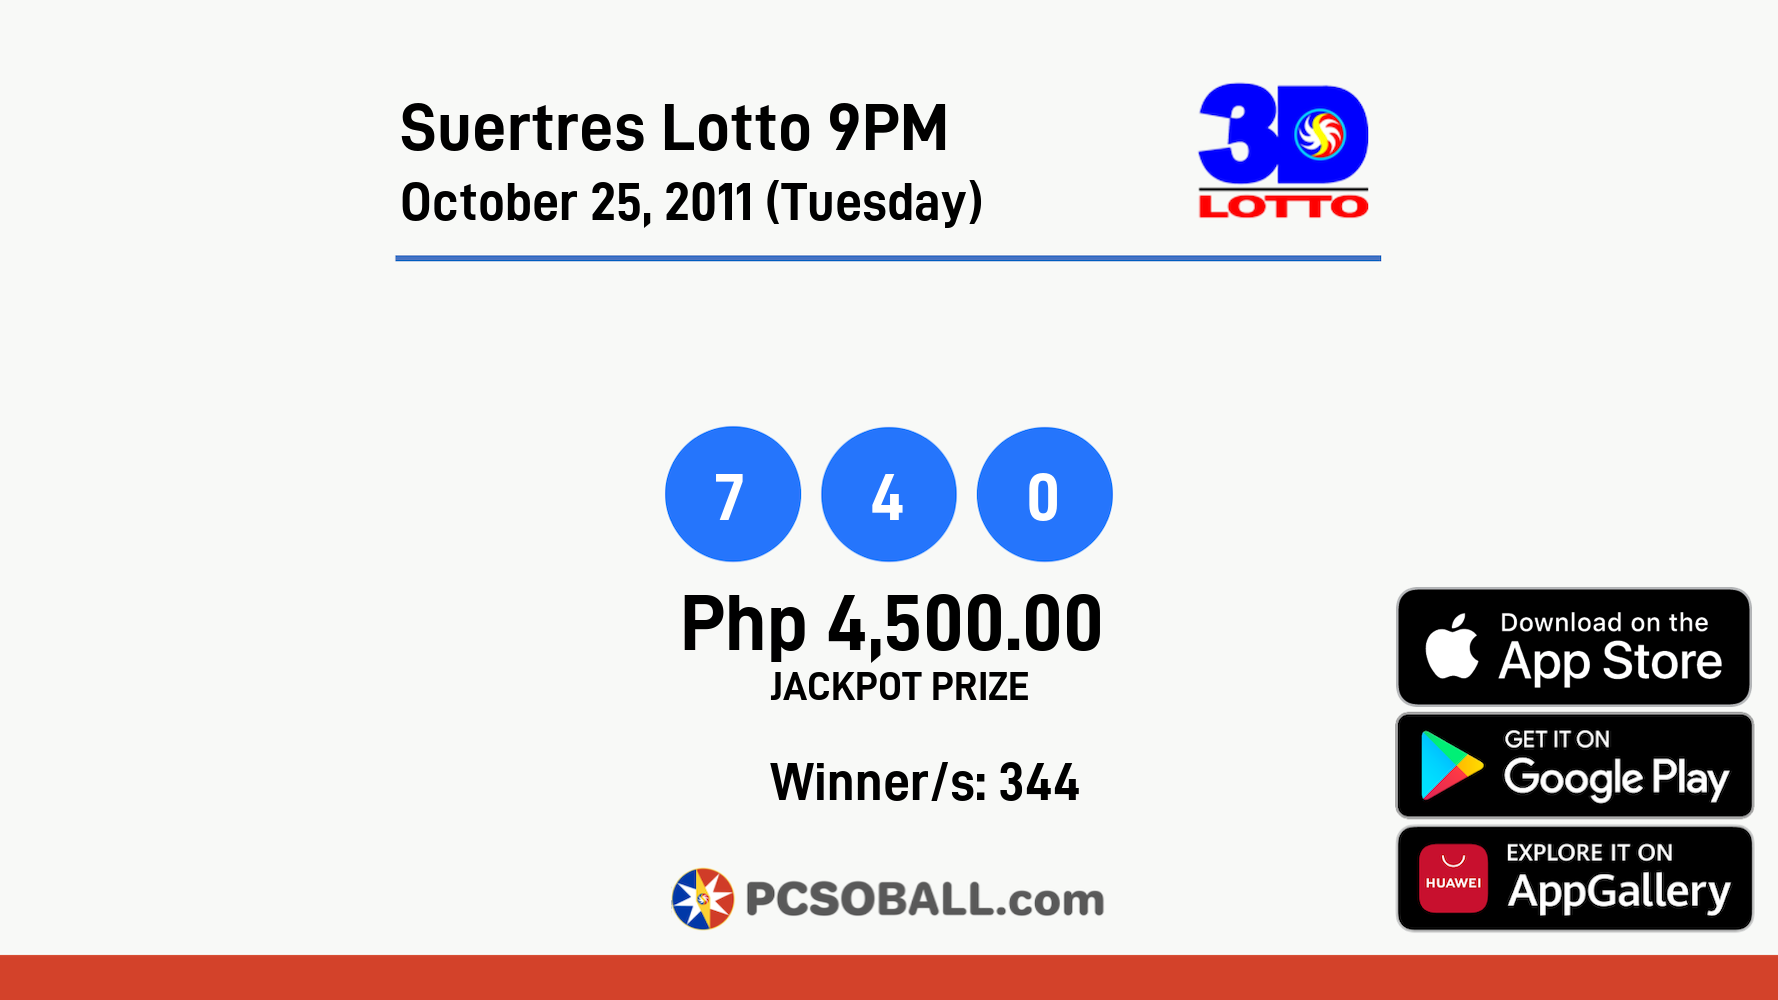 Suertres Lotto 9PM October 25, 2011 (Tuesday) Result